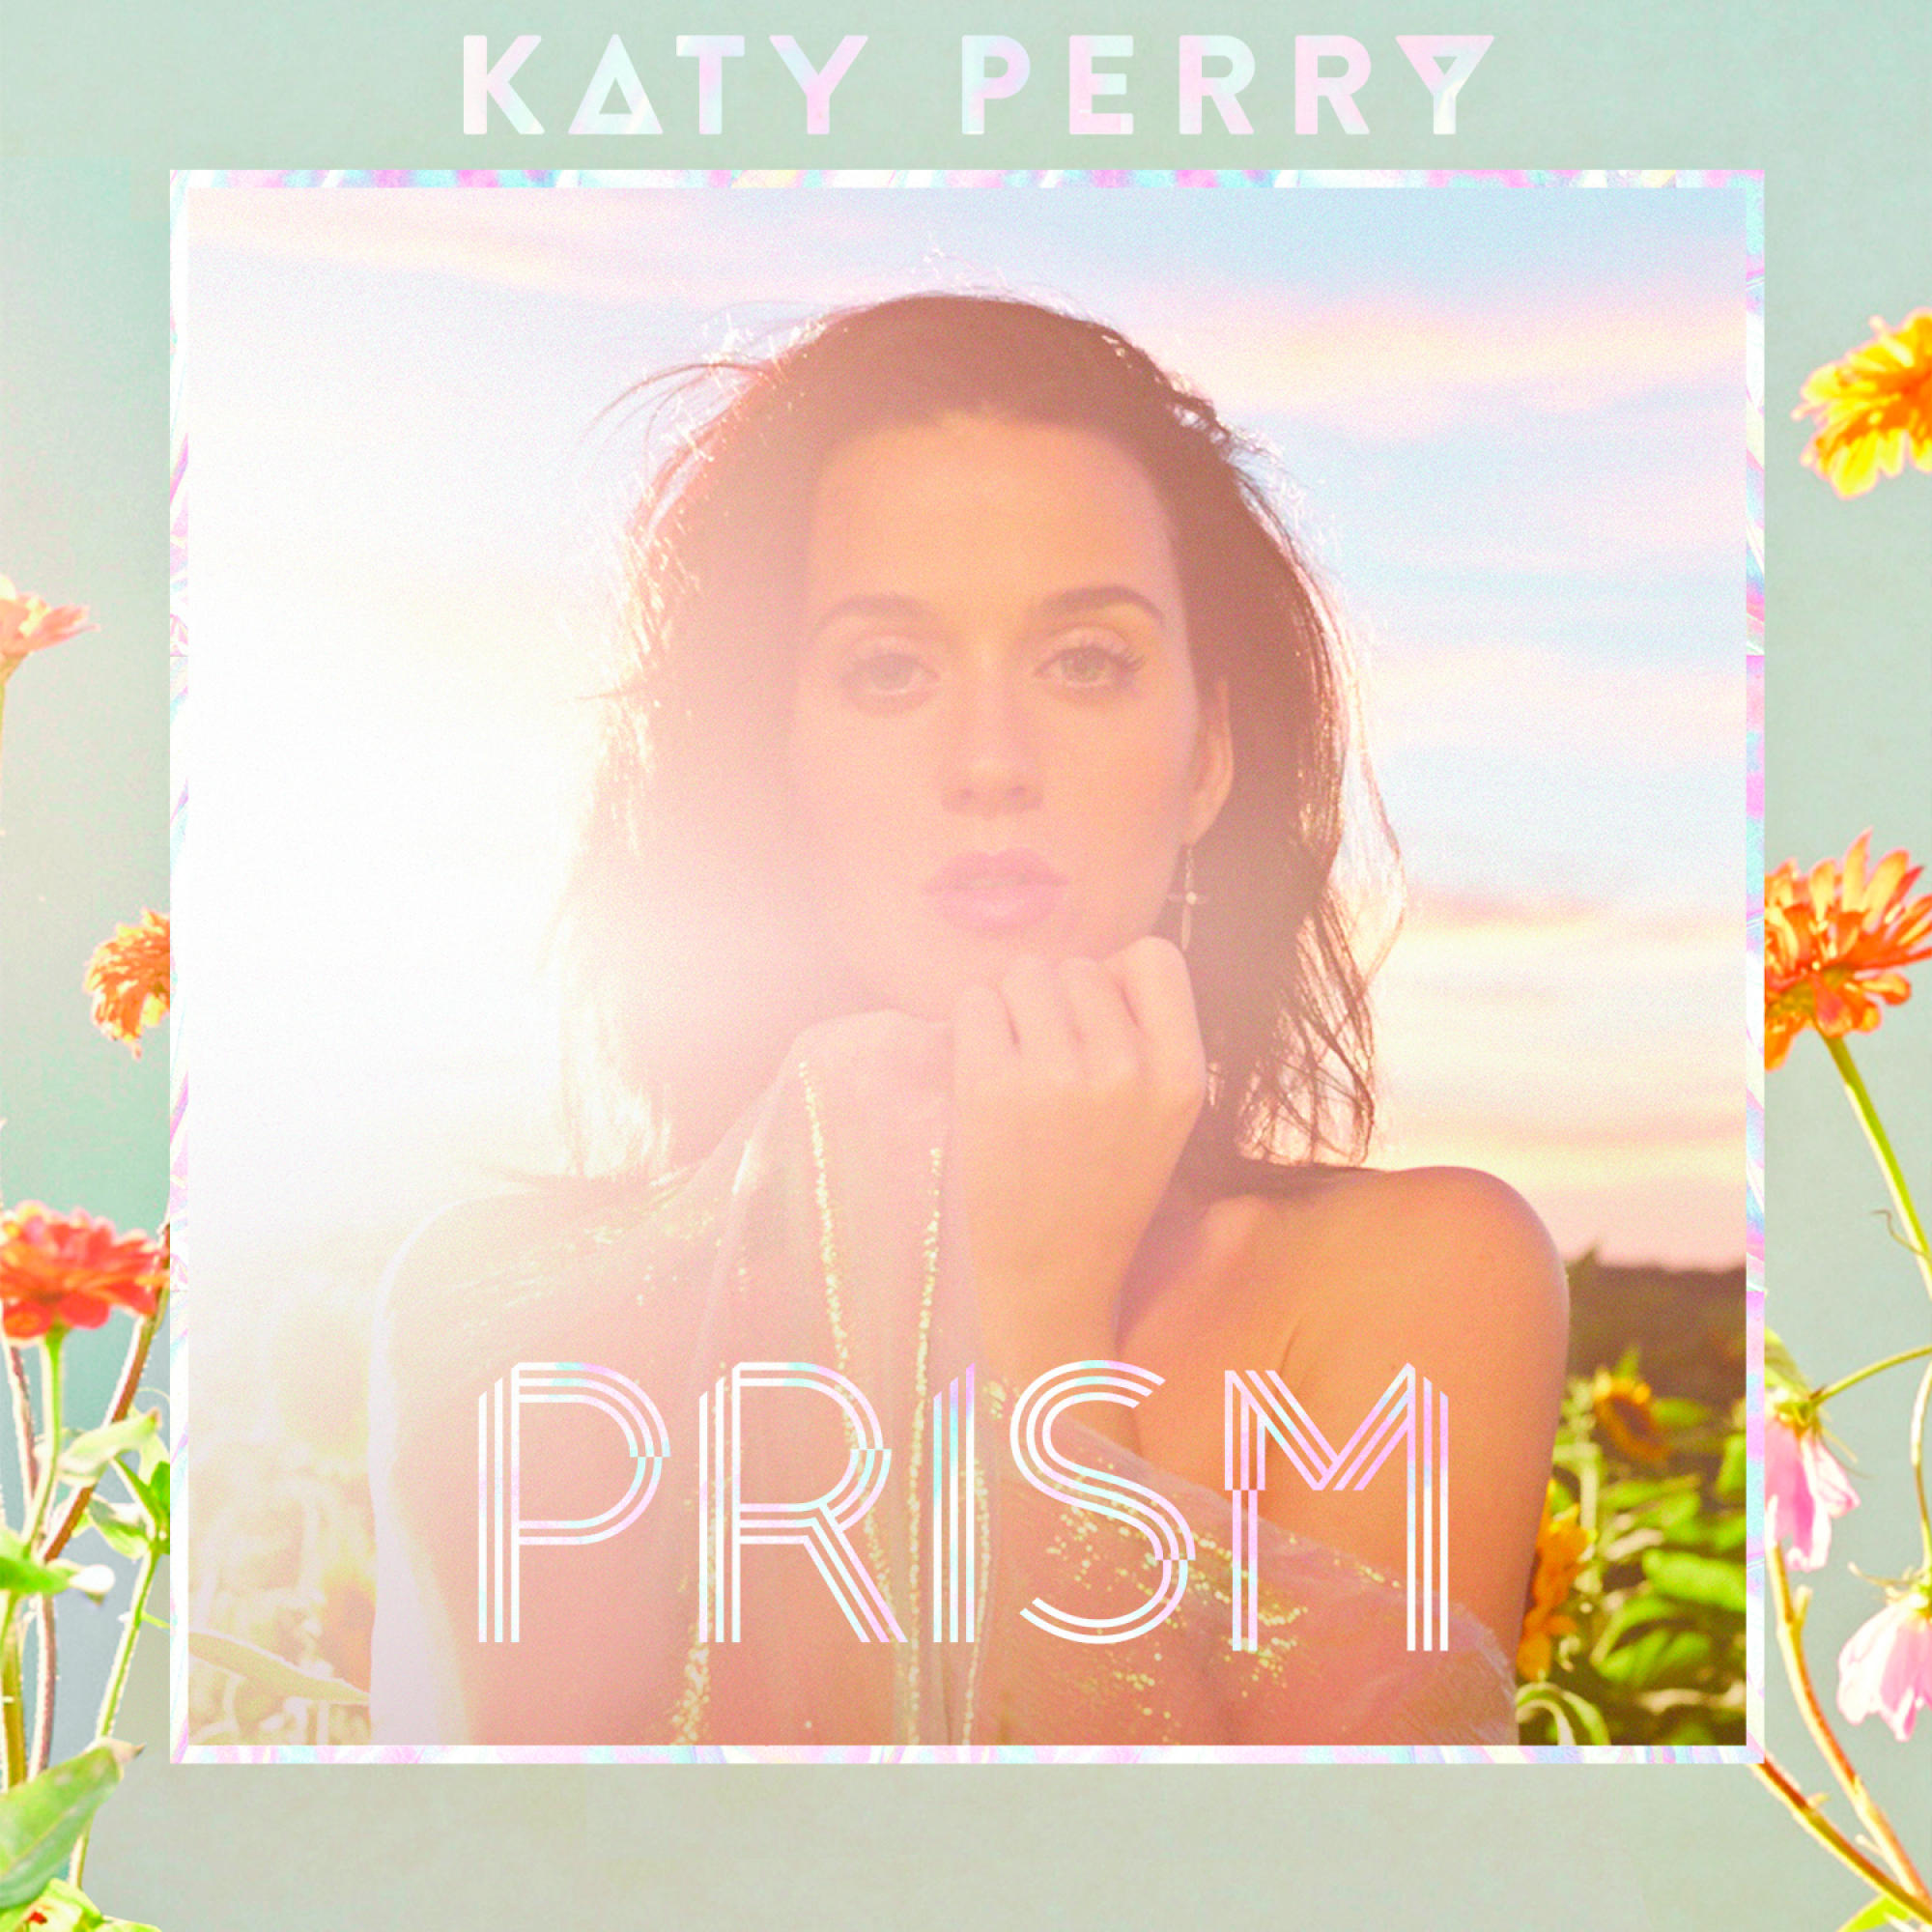 - Prism (CD) - Perry Katy